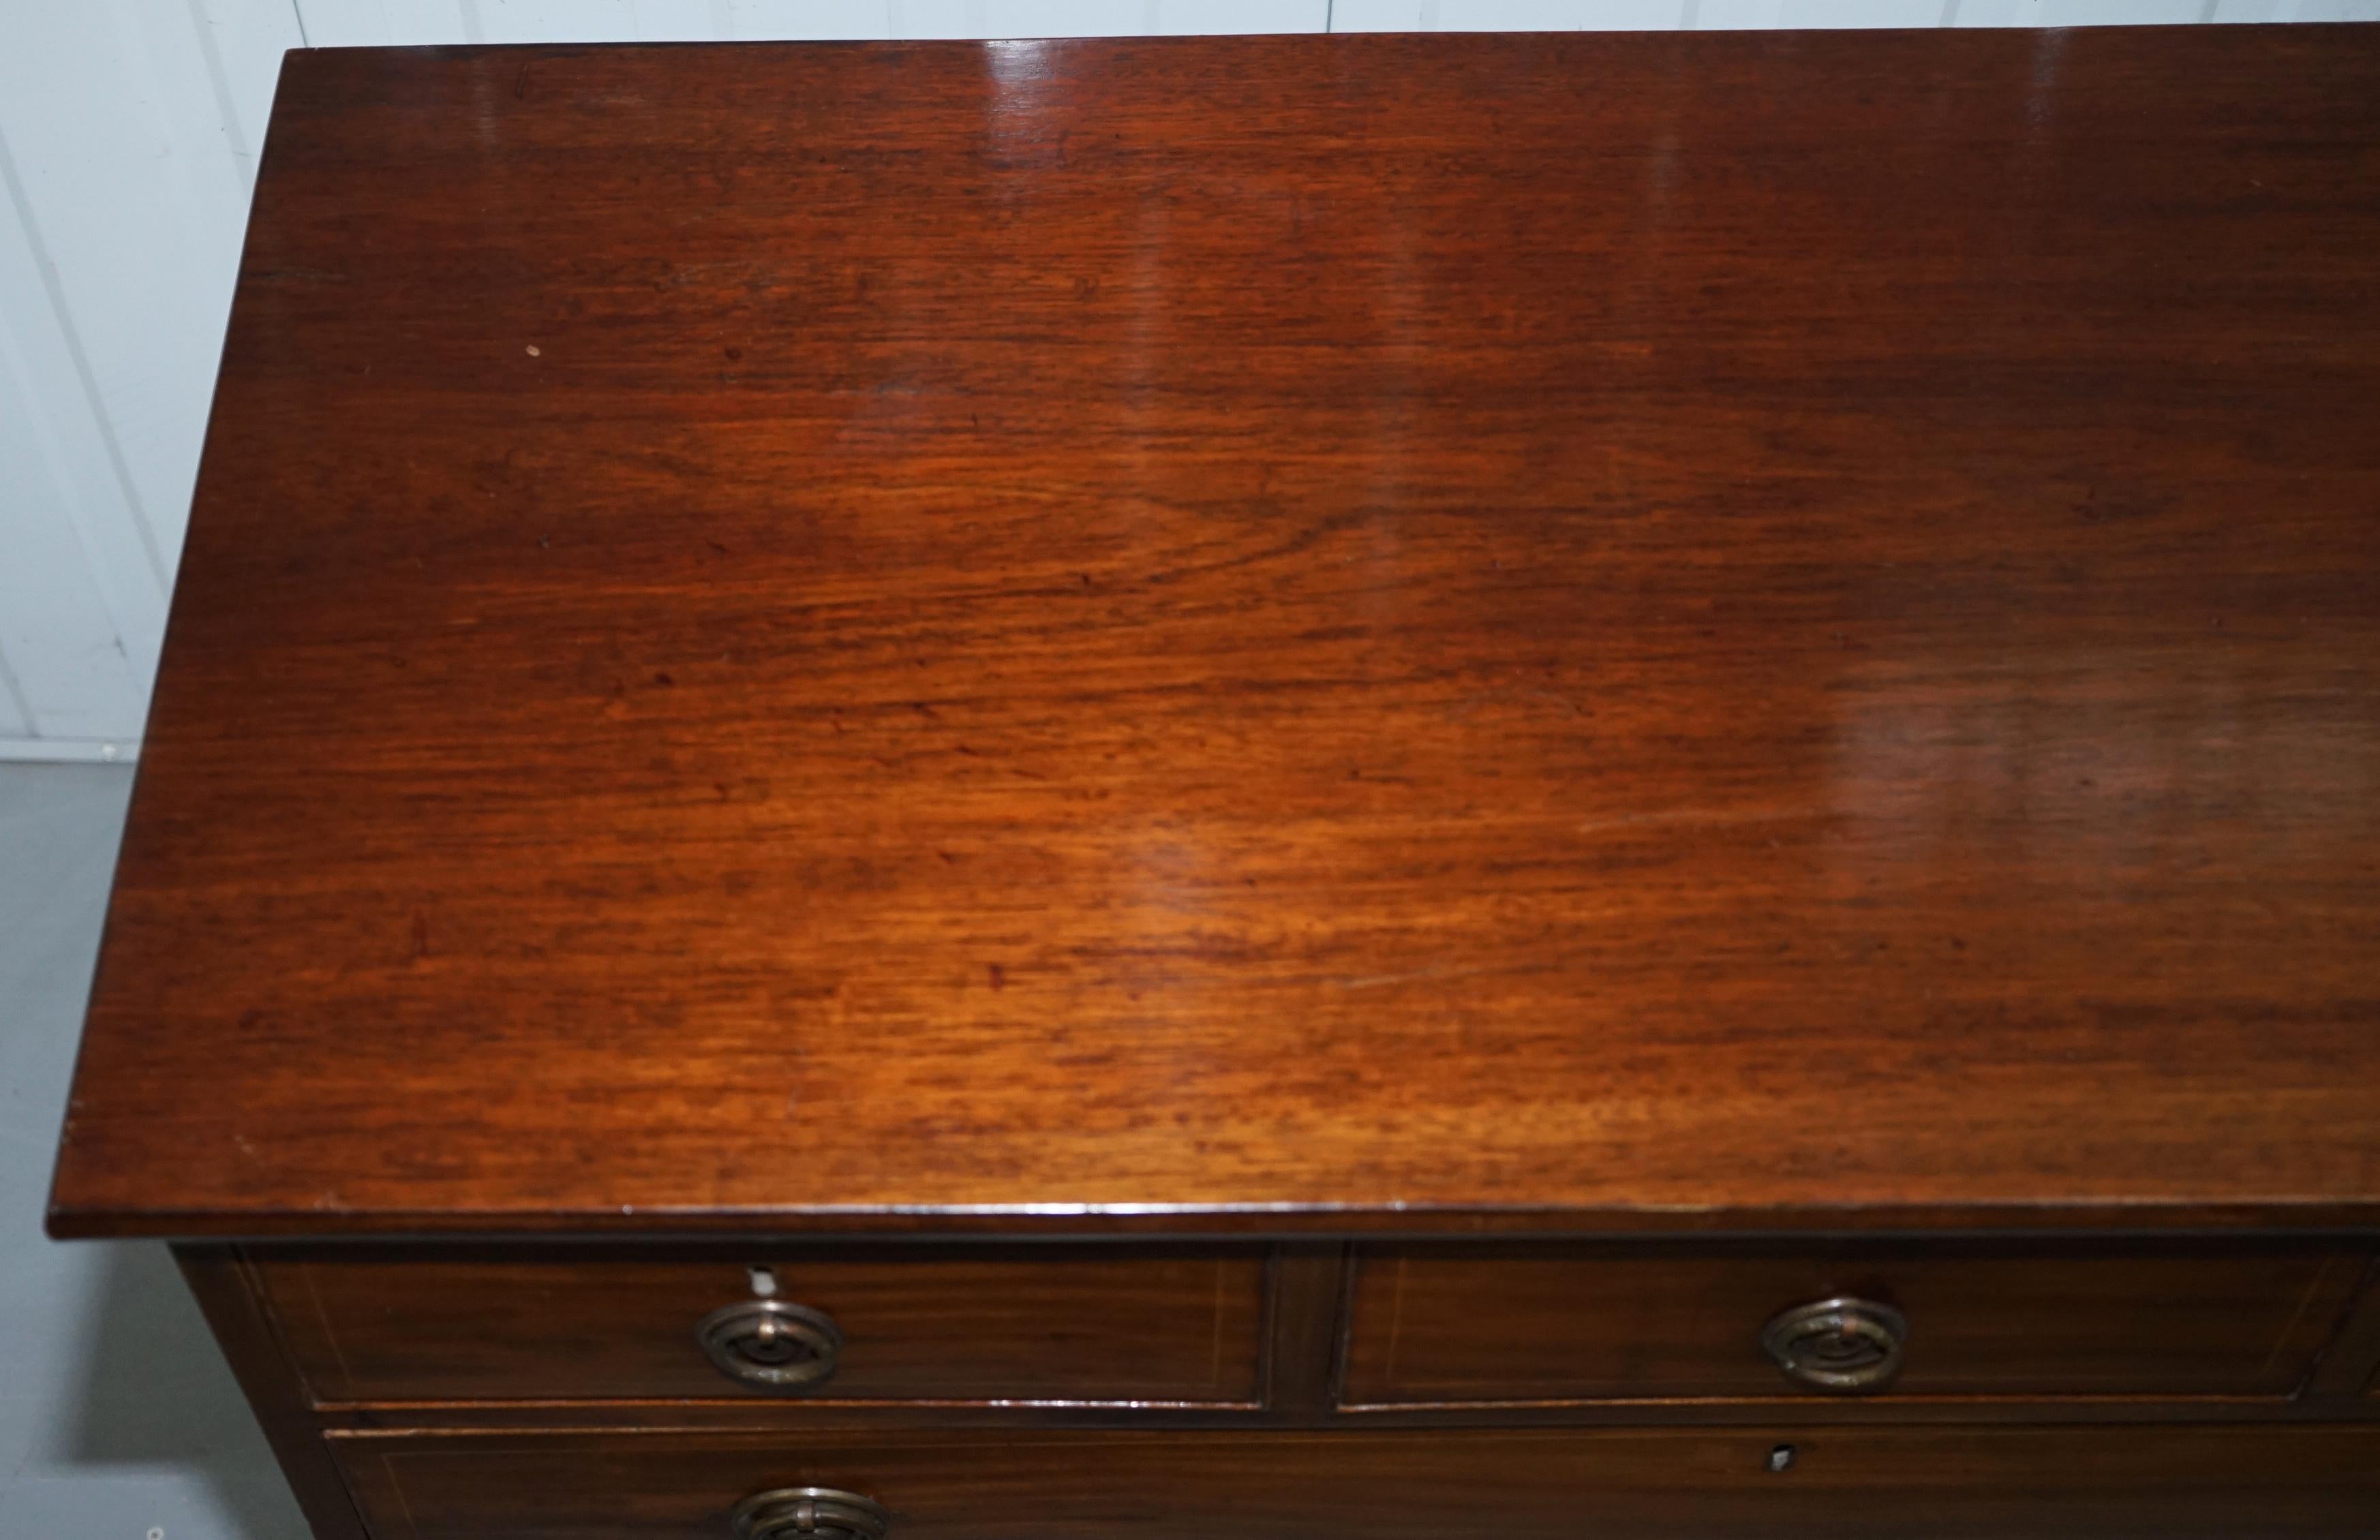 19th Century Lovely circa 1800 Georgian Hardwood Chest of Drawers Three over Three Formation